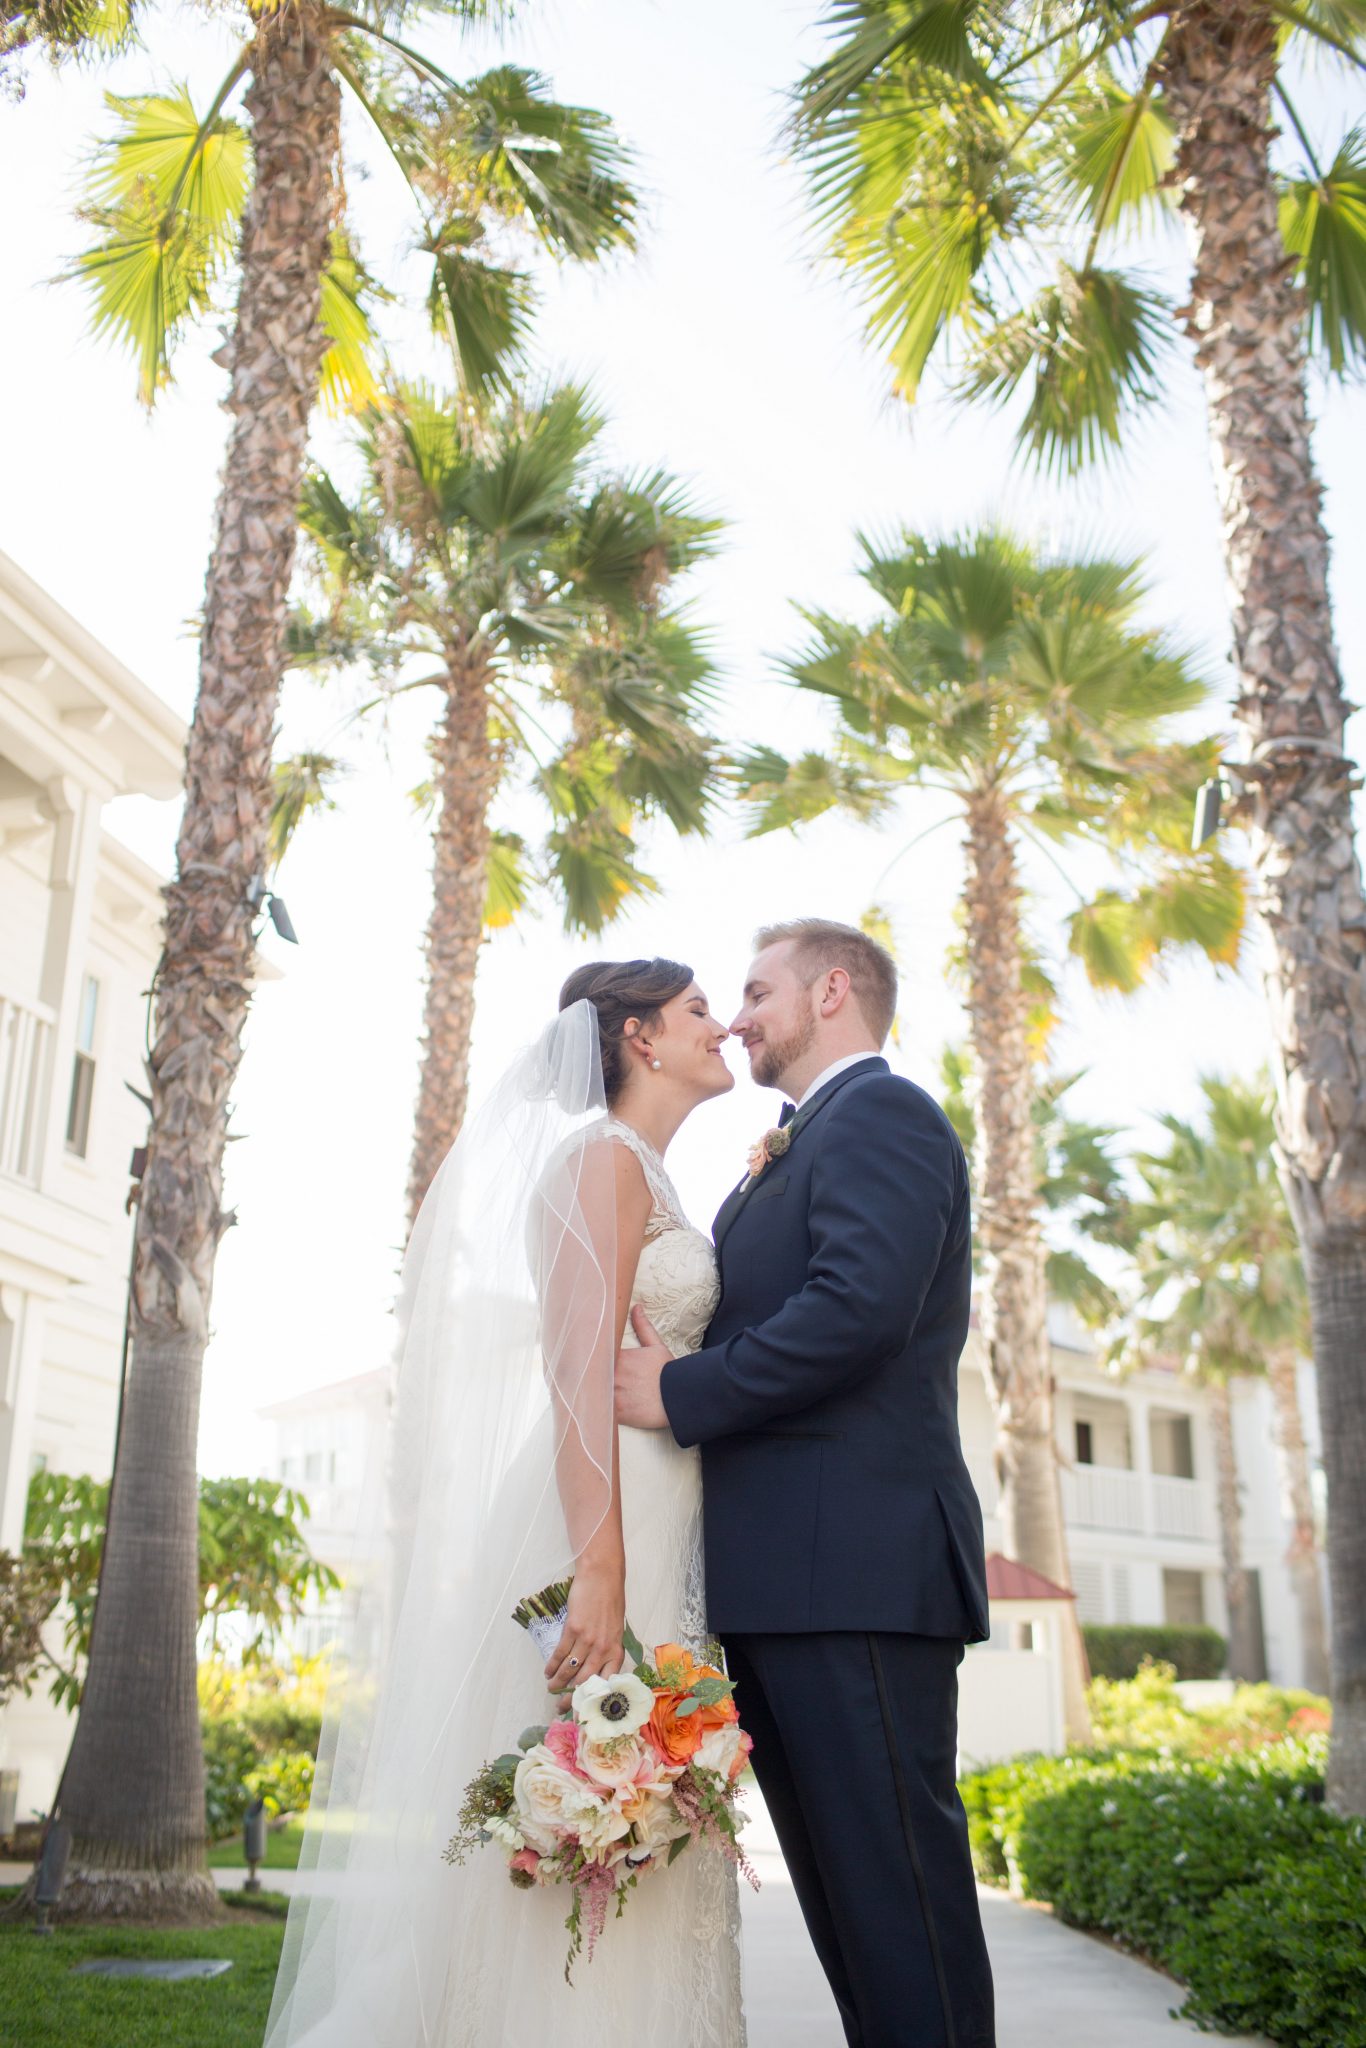 Leslie and Noah embracing during their Beach Glamour wedding at the famous Hotel Del Coronado